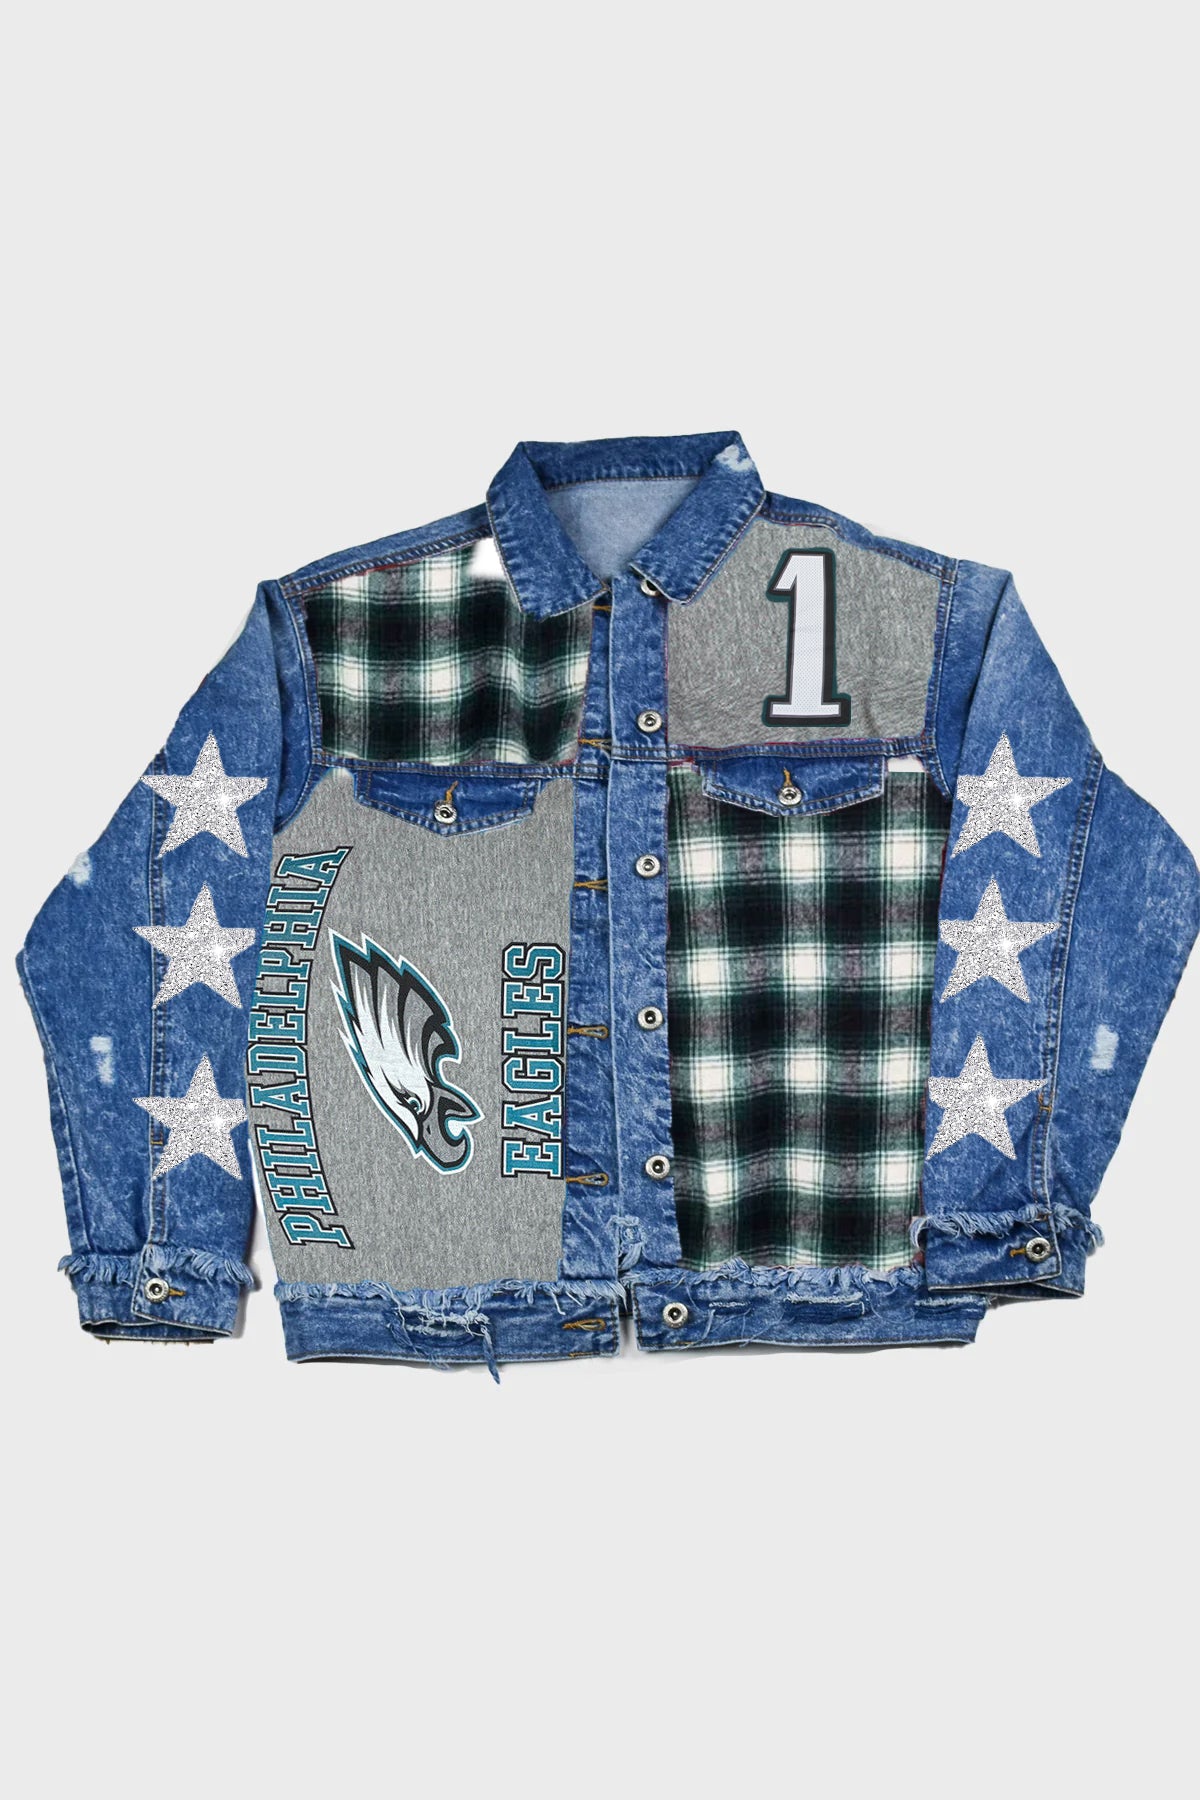 Upcycled Eagles Star Patchwork Jacket